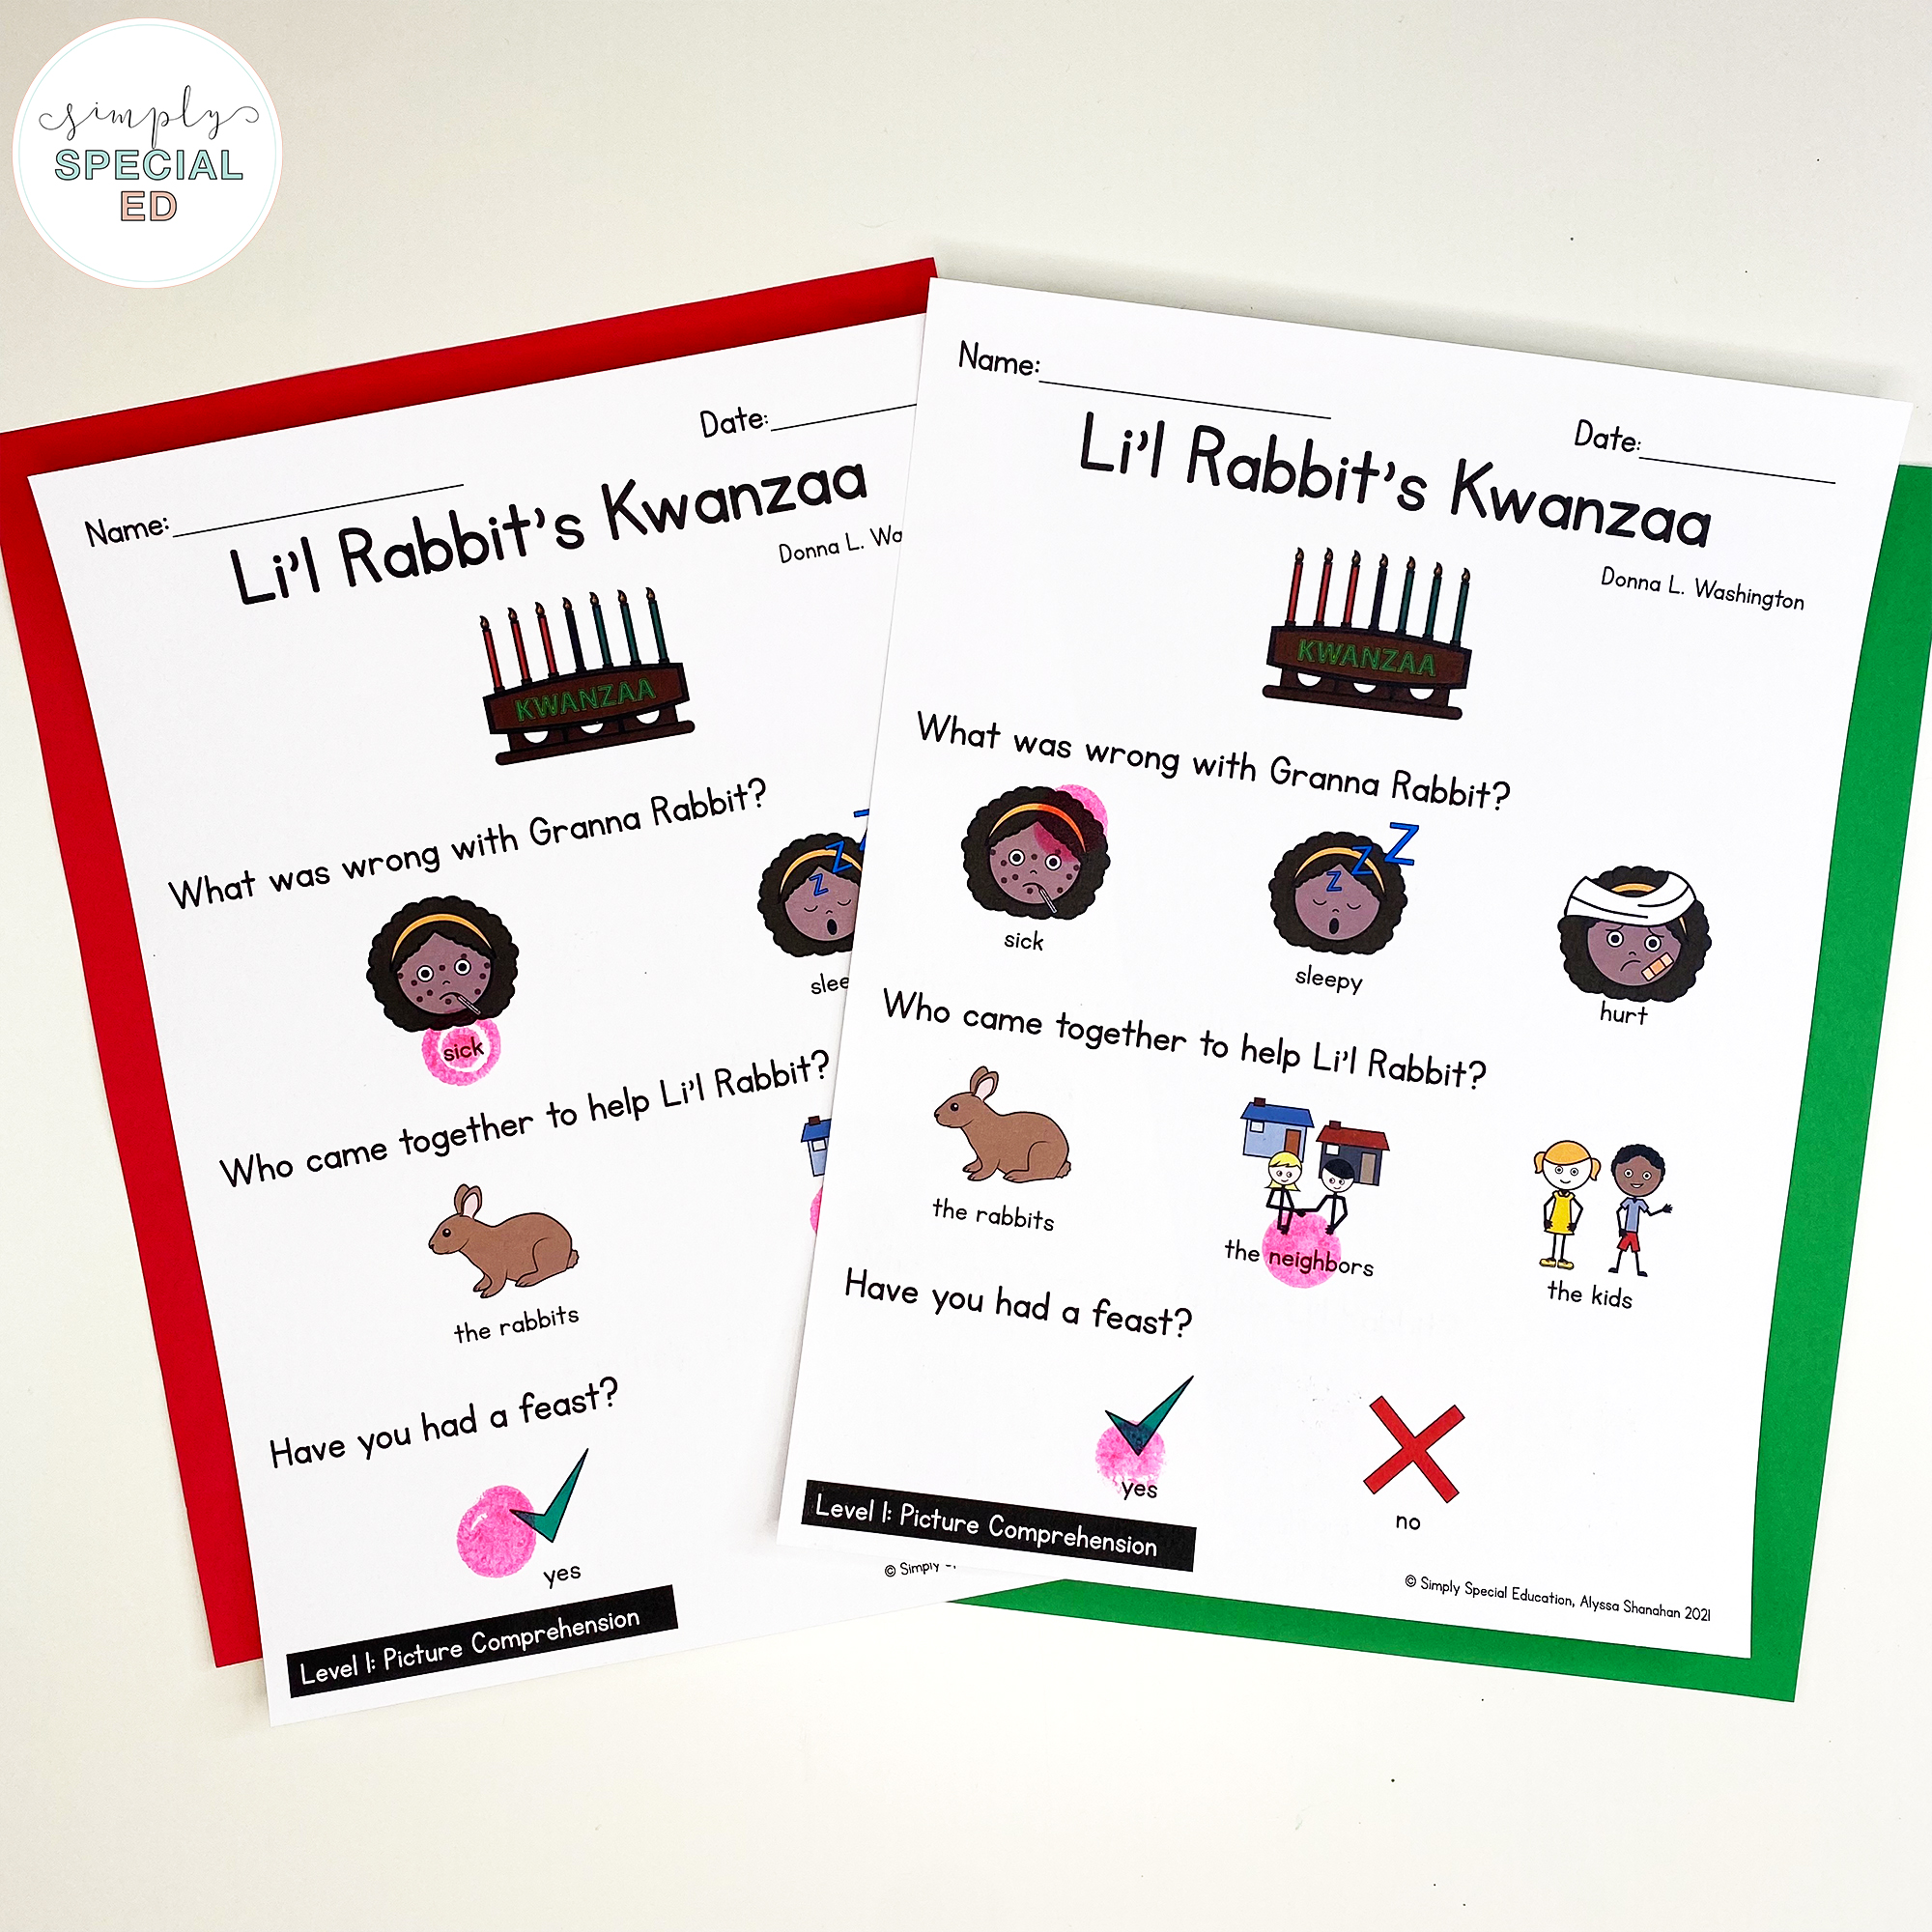 5 Adapted Book activities for Li'l Rabbit's Kwanzaa. This is the perfect way to introduce Kwanzaa to your special ed class.